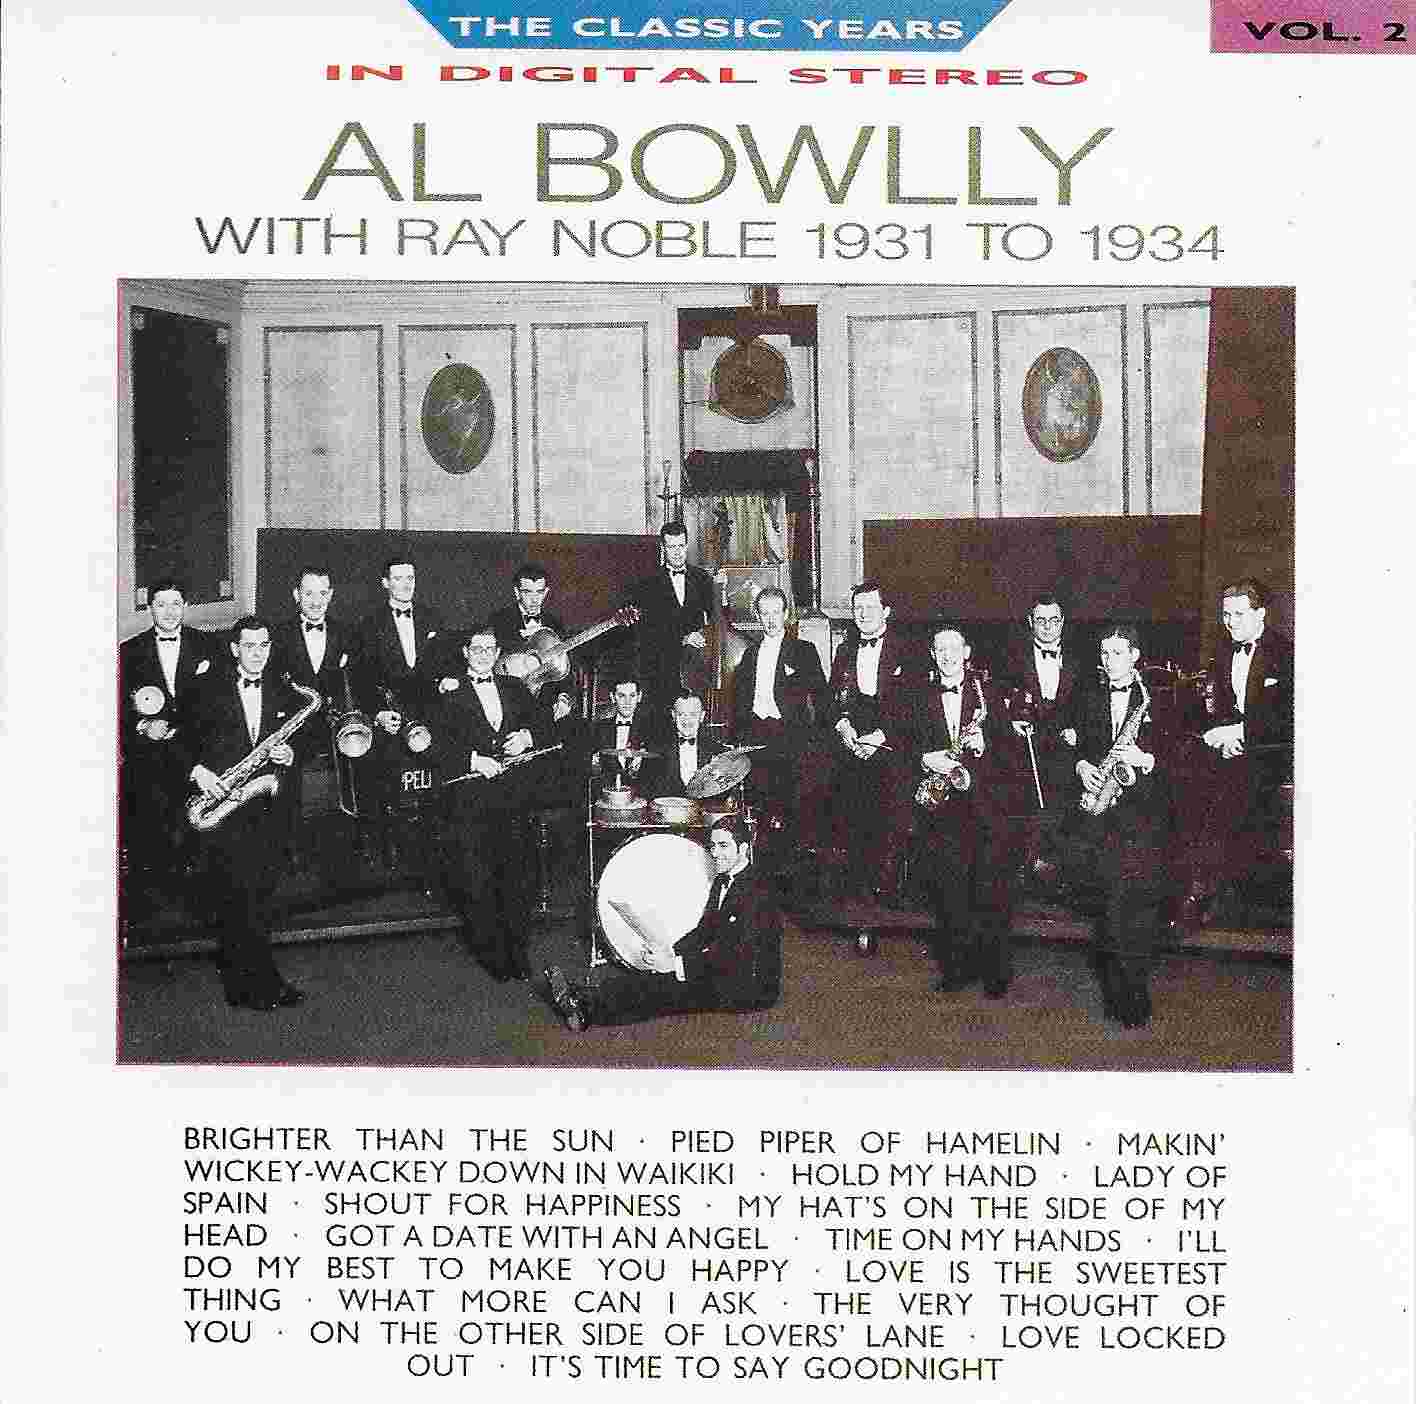 Picture of BBCCD649 Classic years - Volume 2, Al Bowlly by artist Al Bowlly from the BBC cds - Records and Tapes library